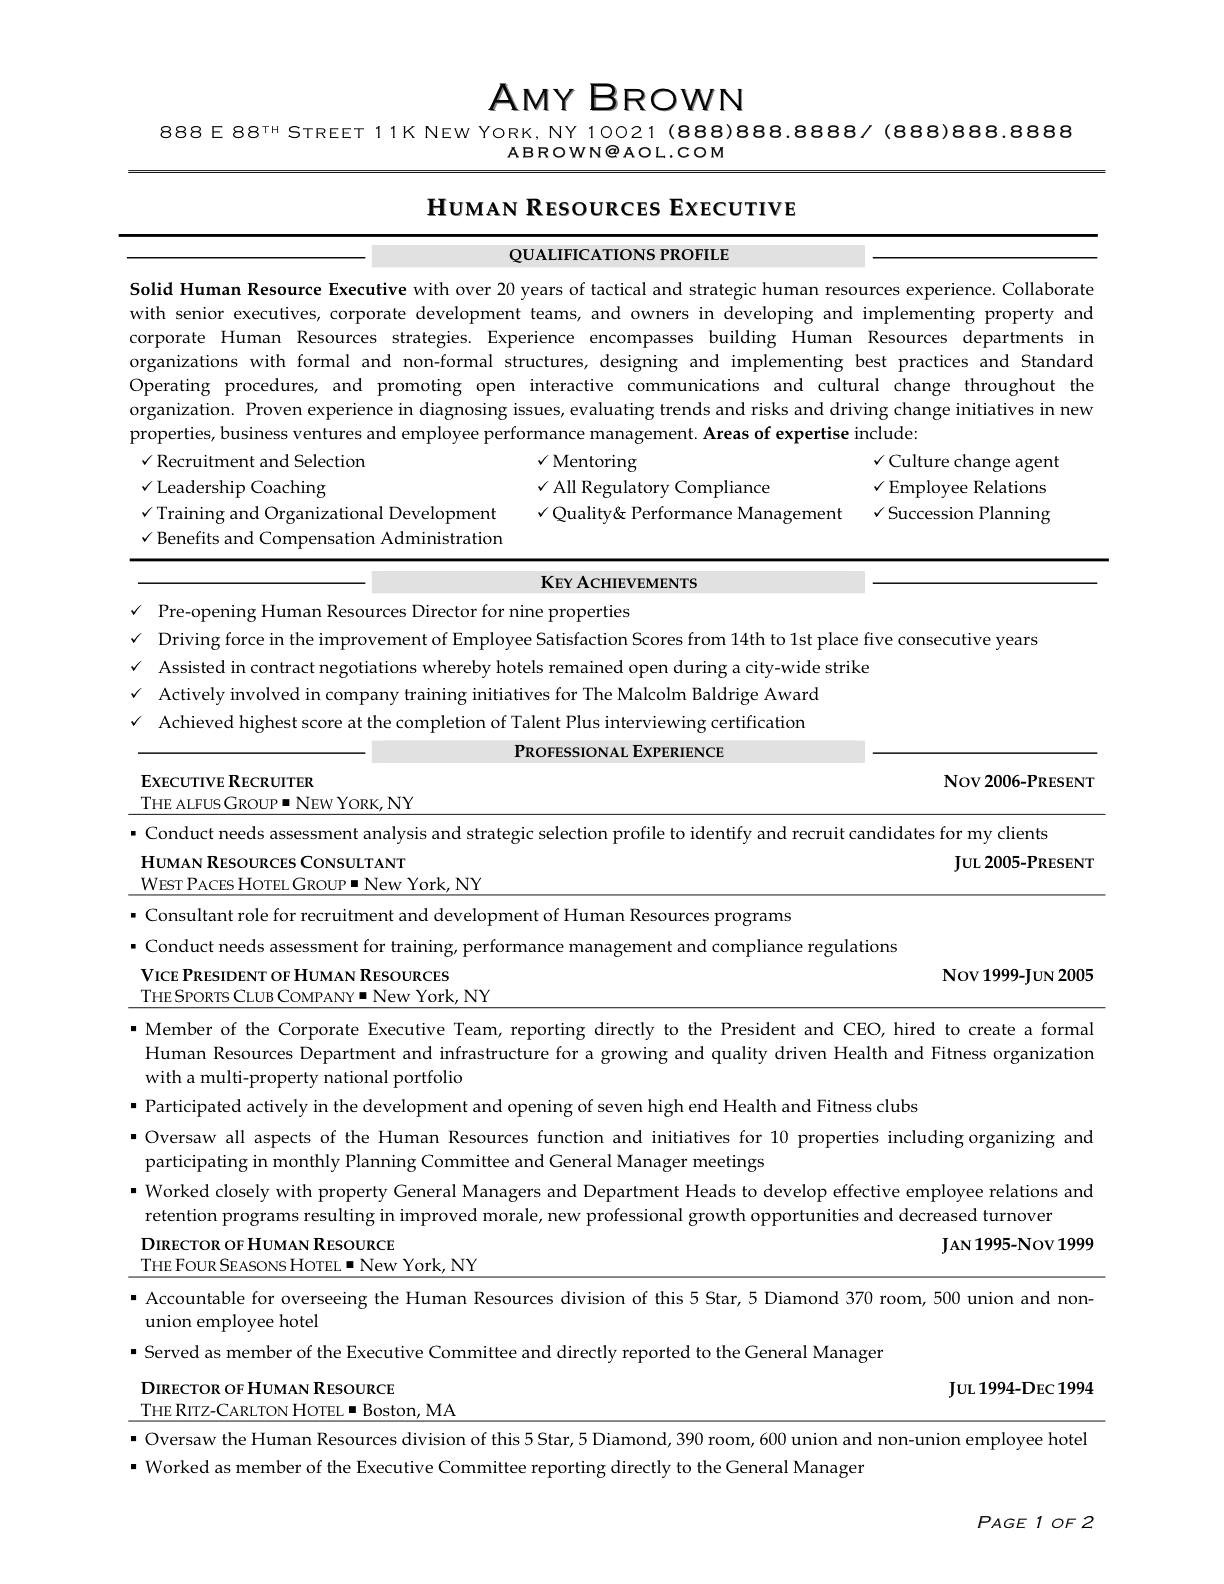 sample resume for experienced hr executive unique sample resume format for hr executive unique sample hr resumes for